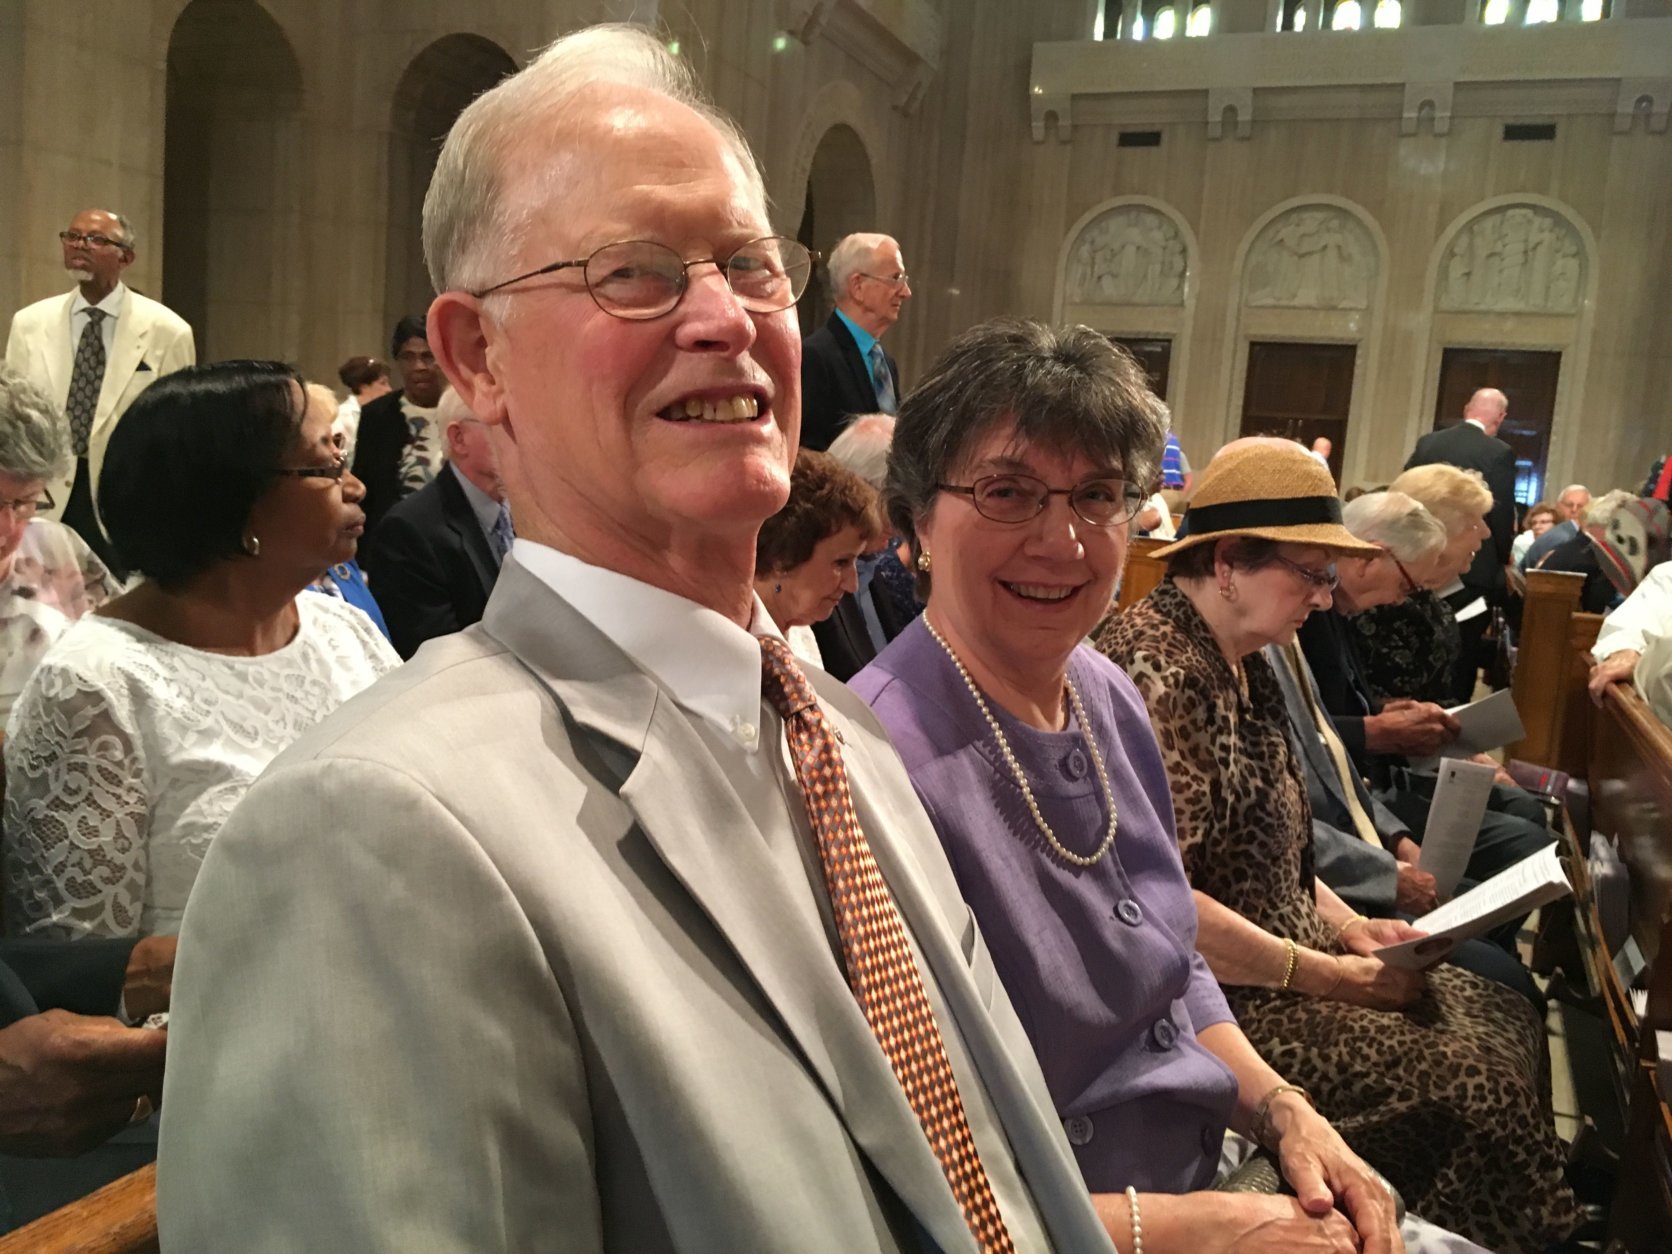 Together, these couples represent more than 33,000 years of marriage throughout the Archdiocese of Washington, which covers Washington D.C., and Montgomery, Prince George's, Charles, Calvert and St. Mary's Counties in Maryland. (WTOP/Liz Anderson)